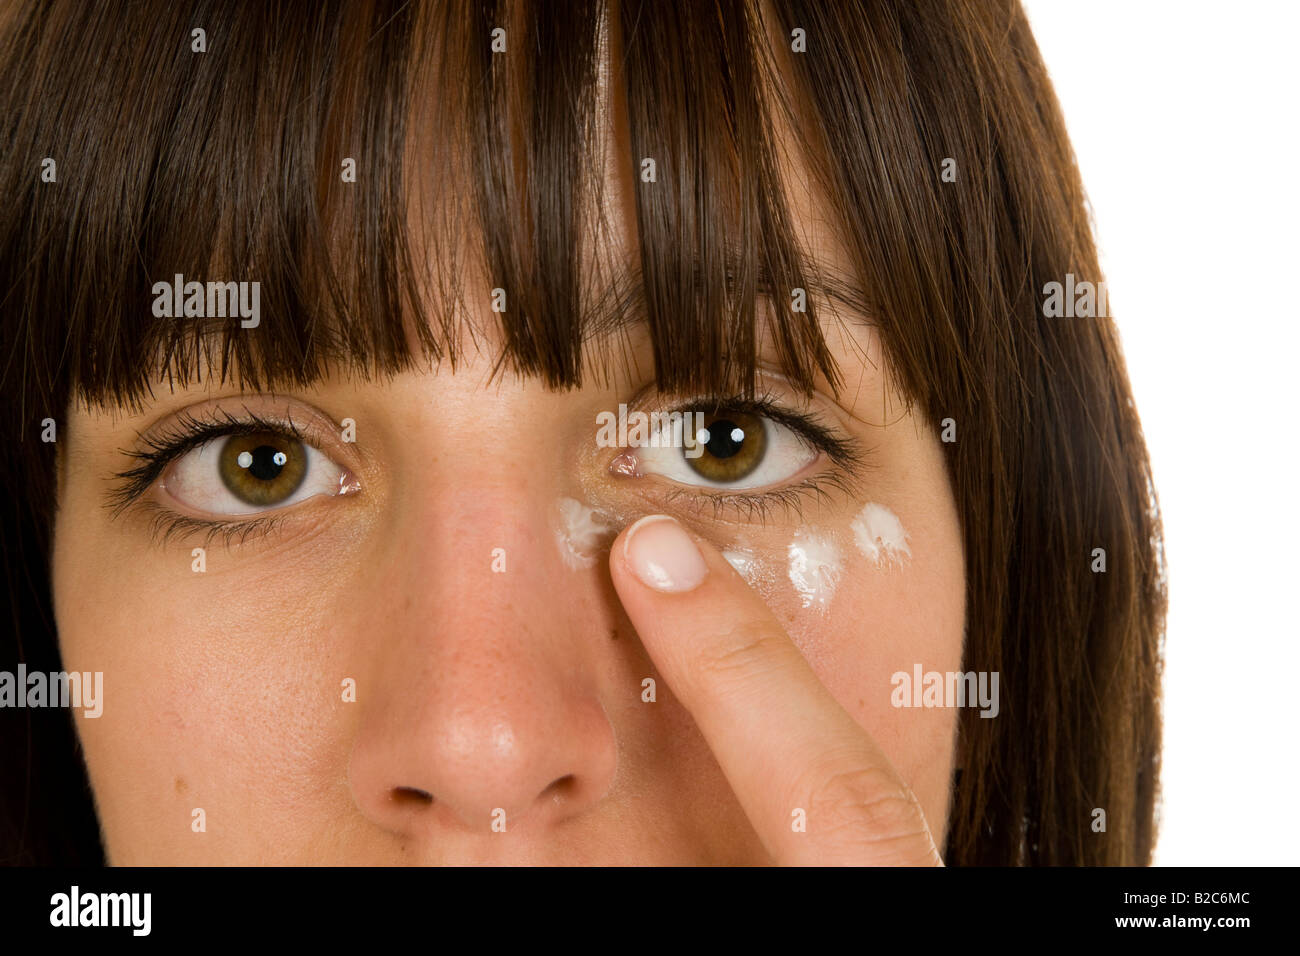 20-year-old woman applying lotion to her face Stock Photo